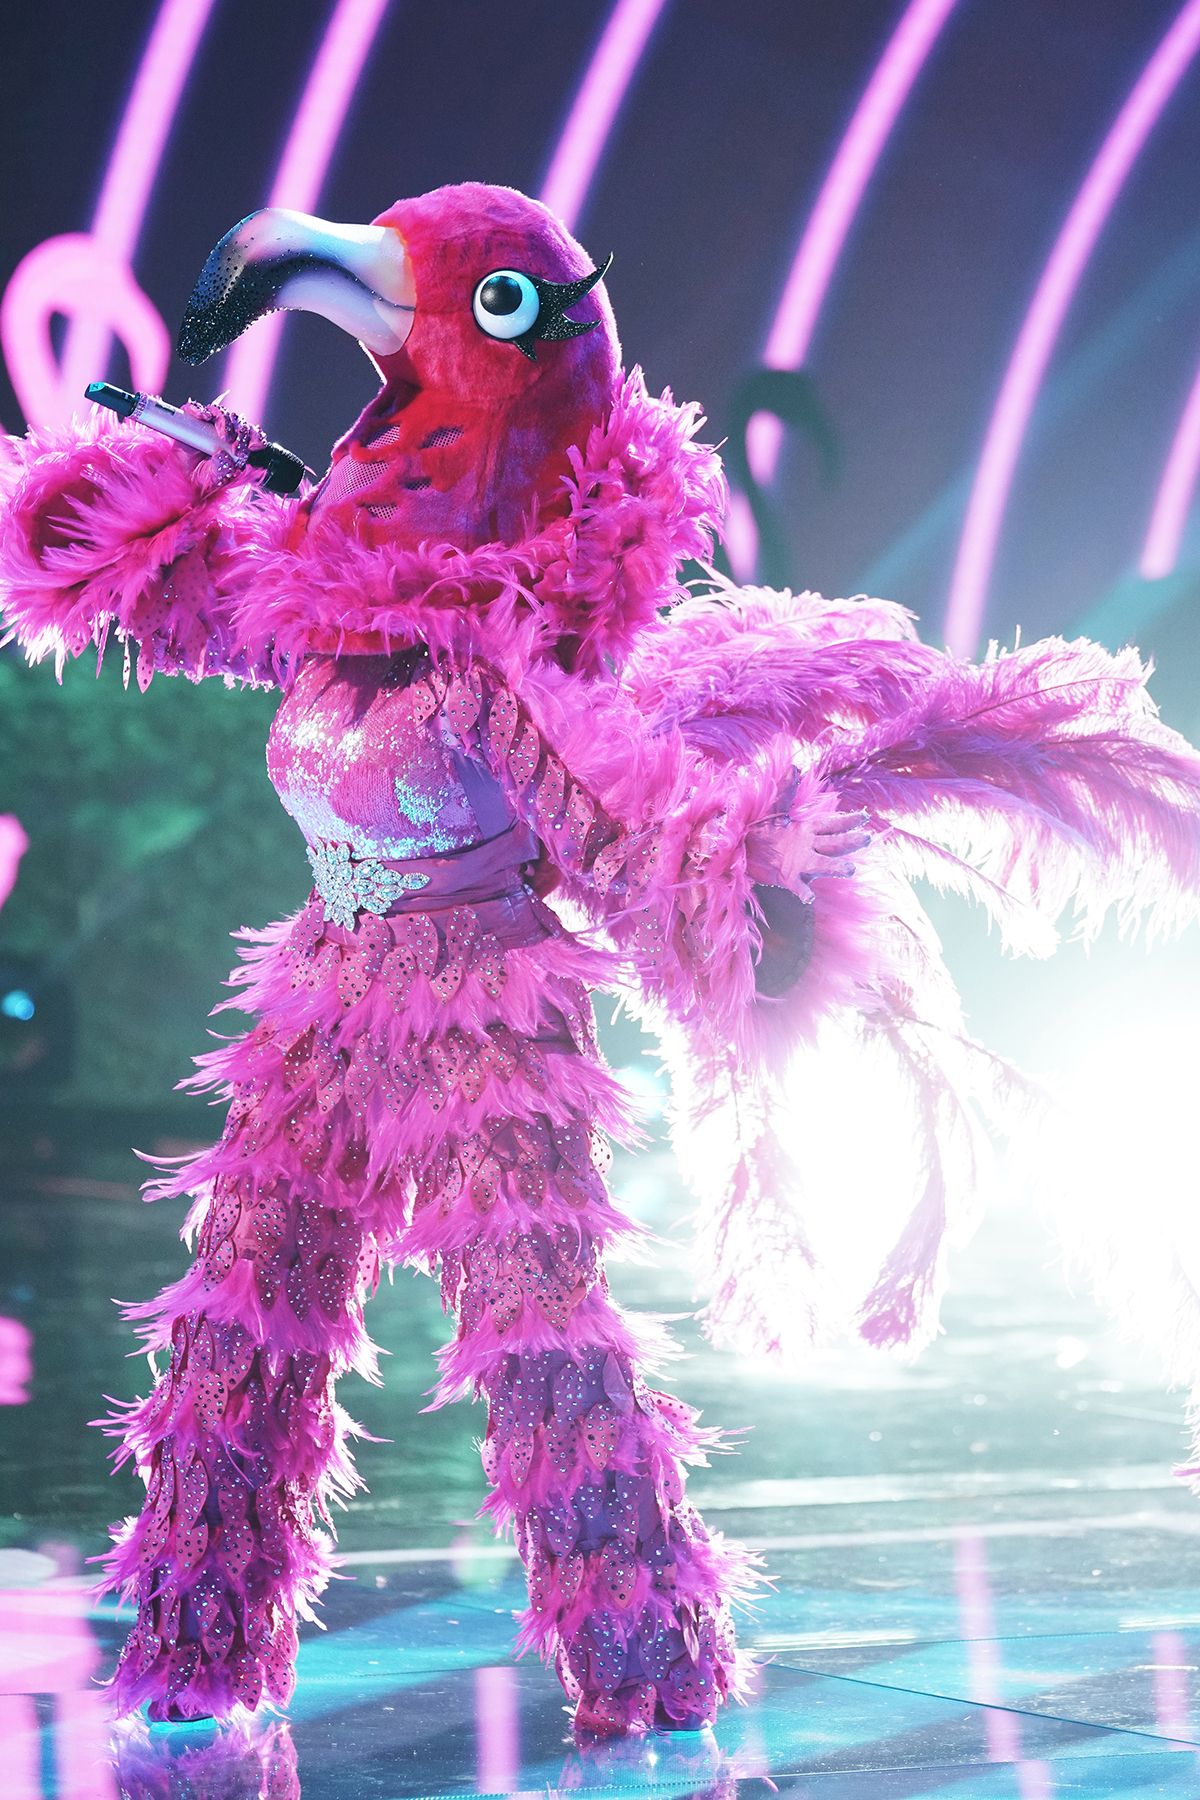 Who Is The Flamingo On The Masked Singer The Flamingo